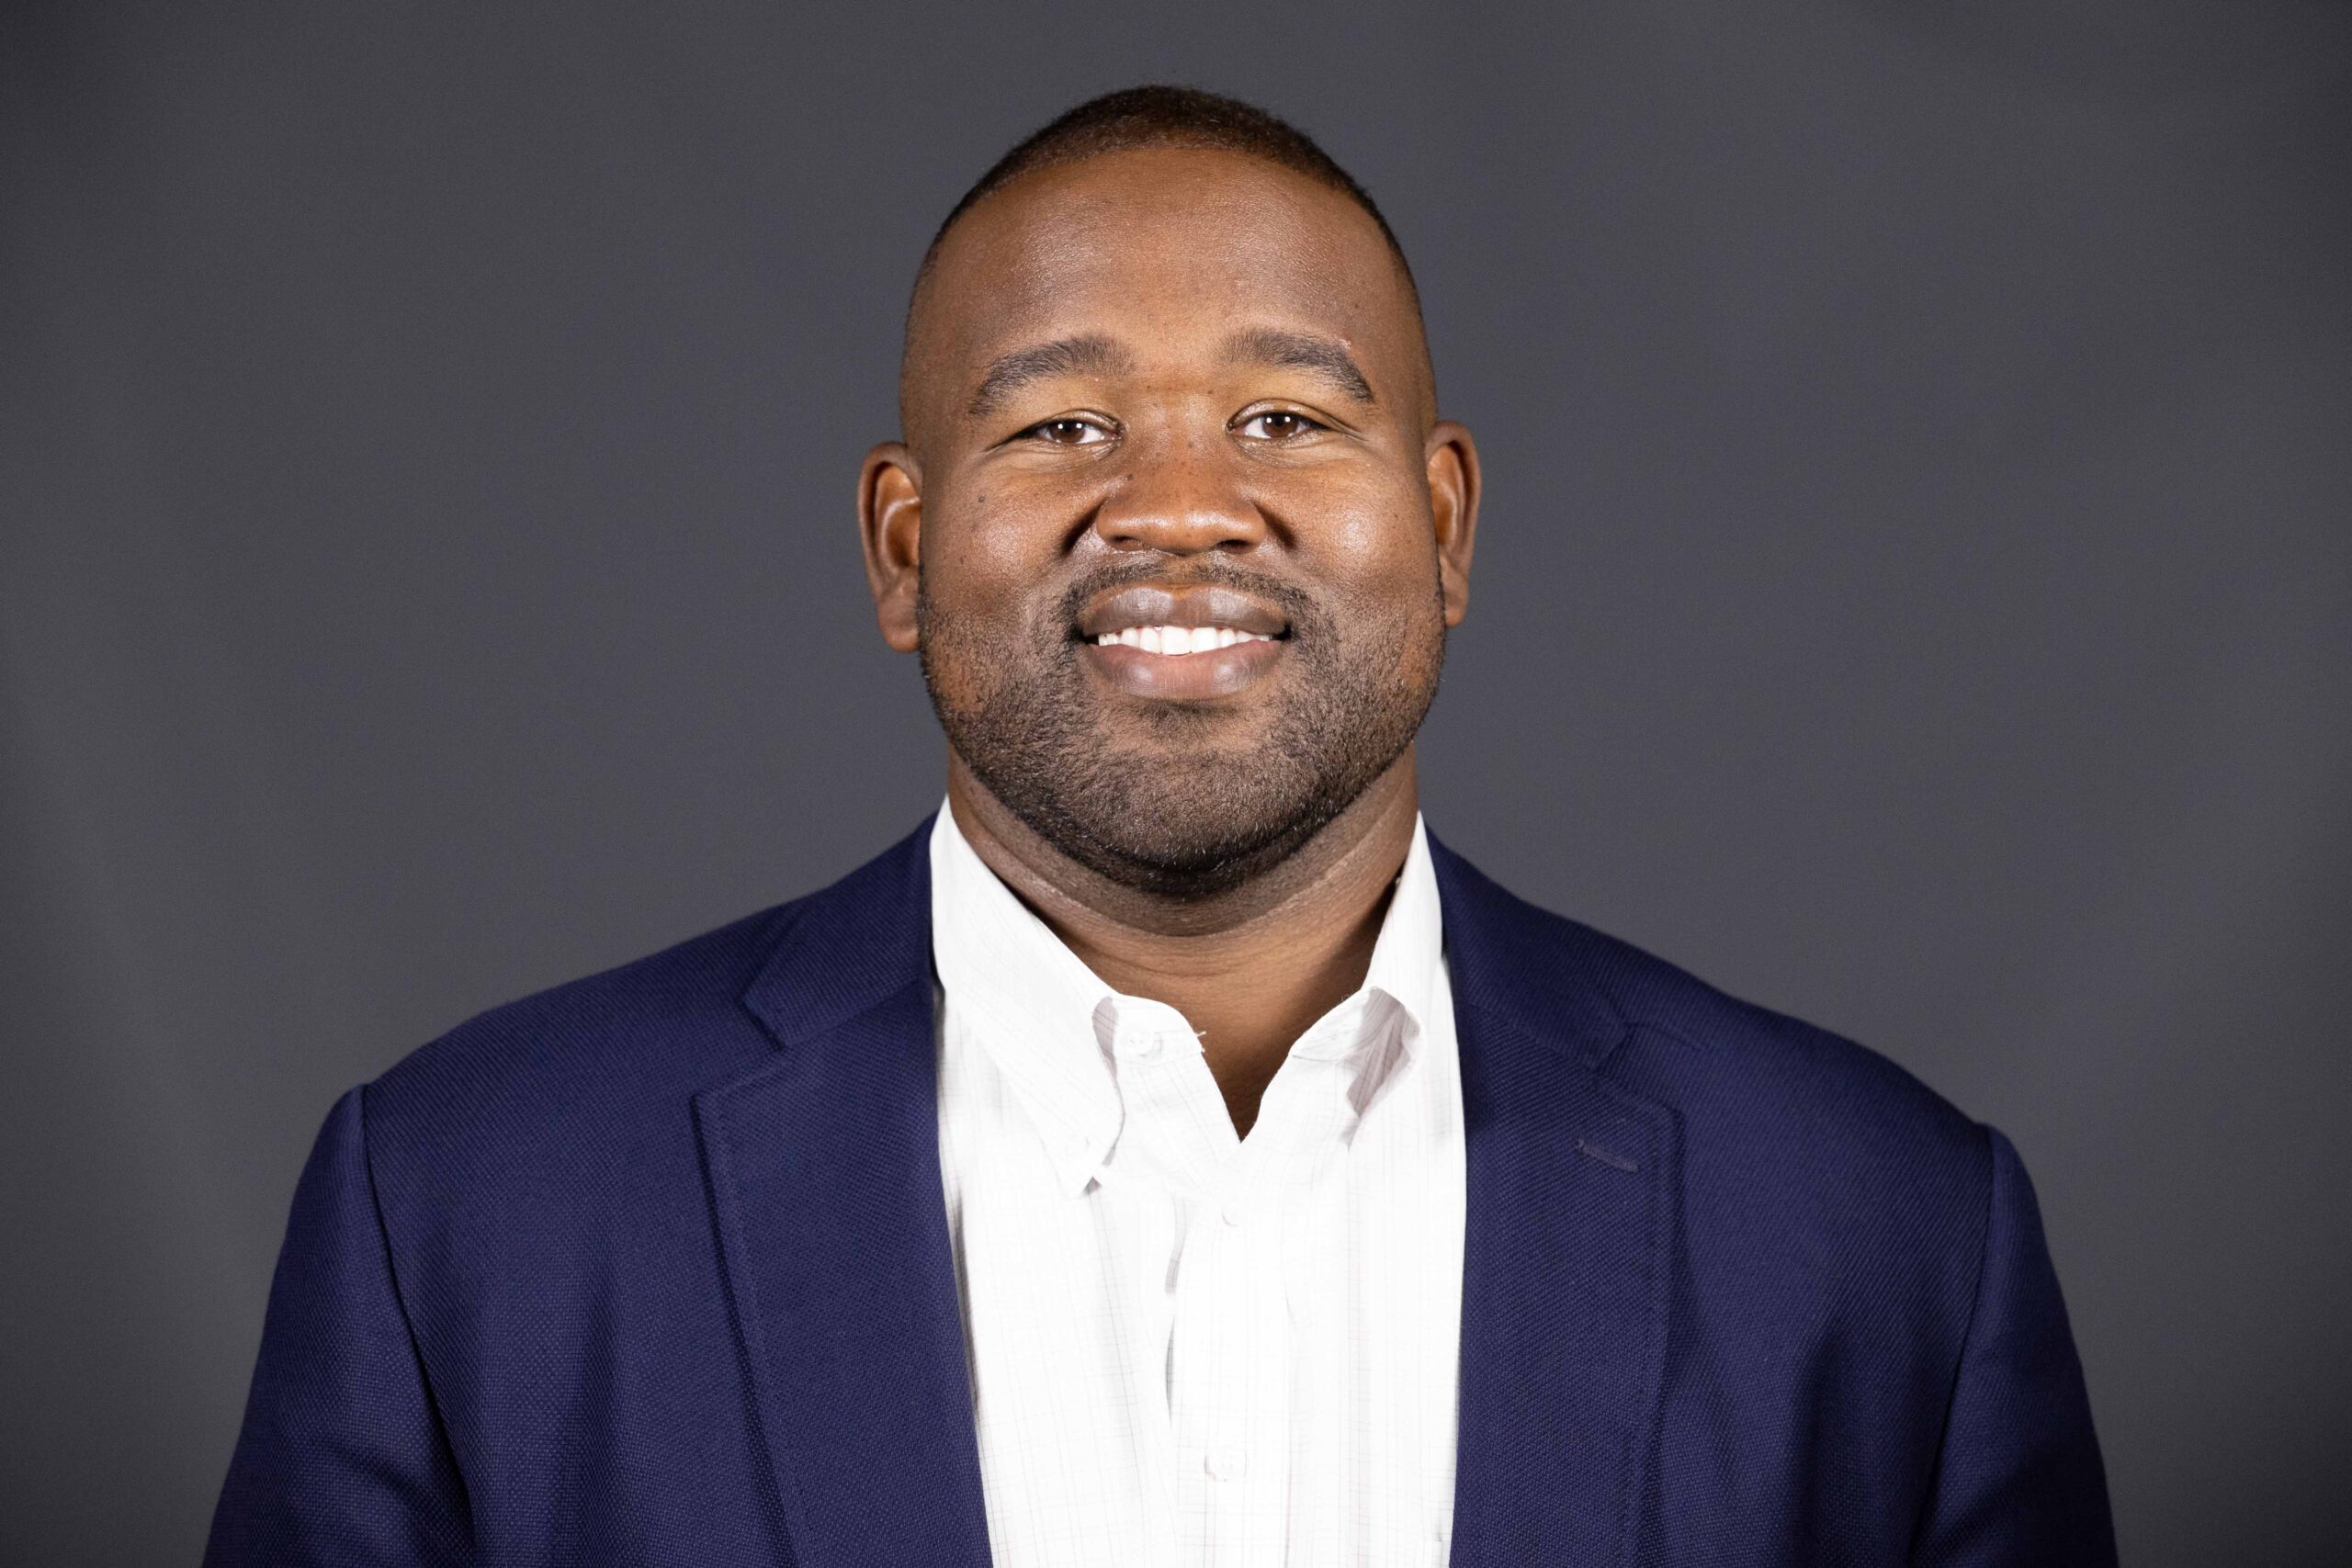 Portrait photo of Jacques McClendon. He is standing in front of a dark background. He has dark skin and short black hair. He is smiling in the photo